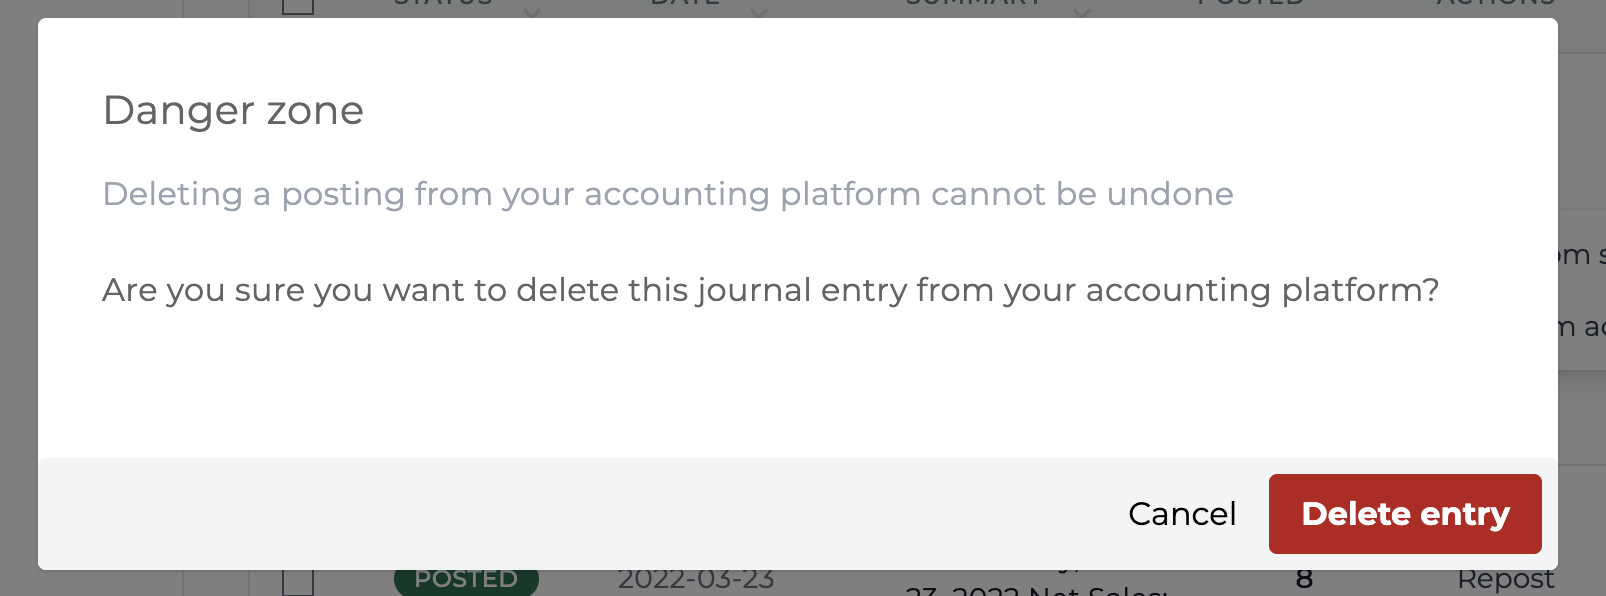 Screenshot displaying the alert to confirm deletion of the journal entry